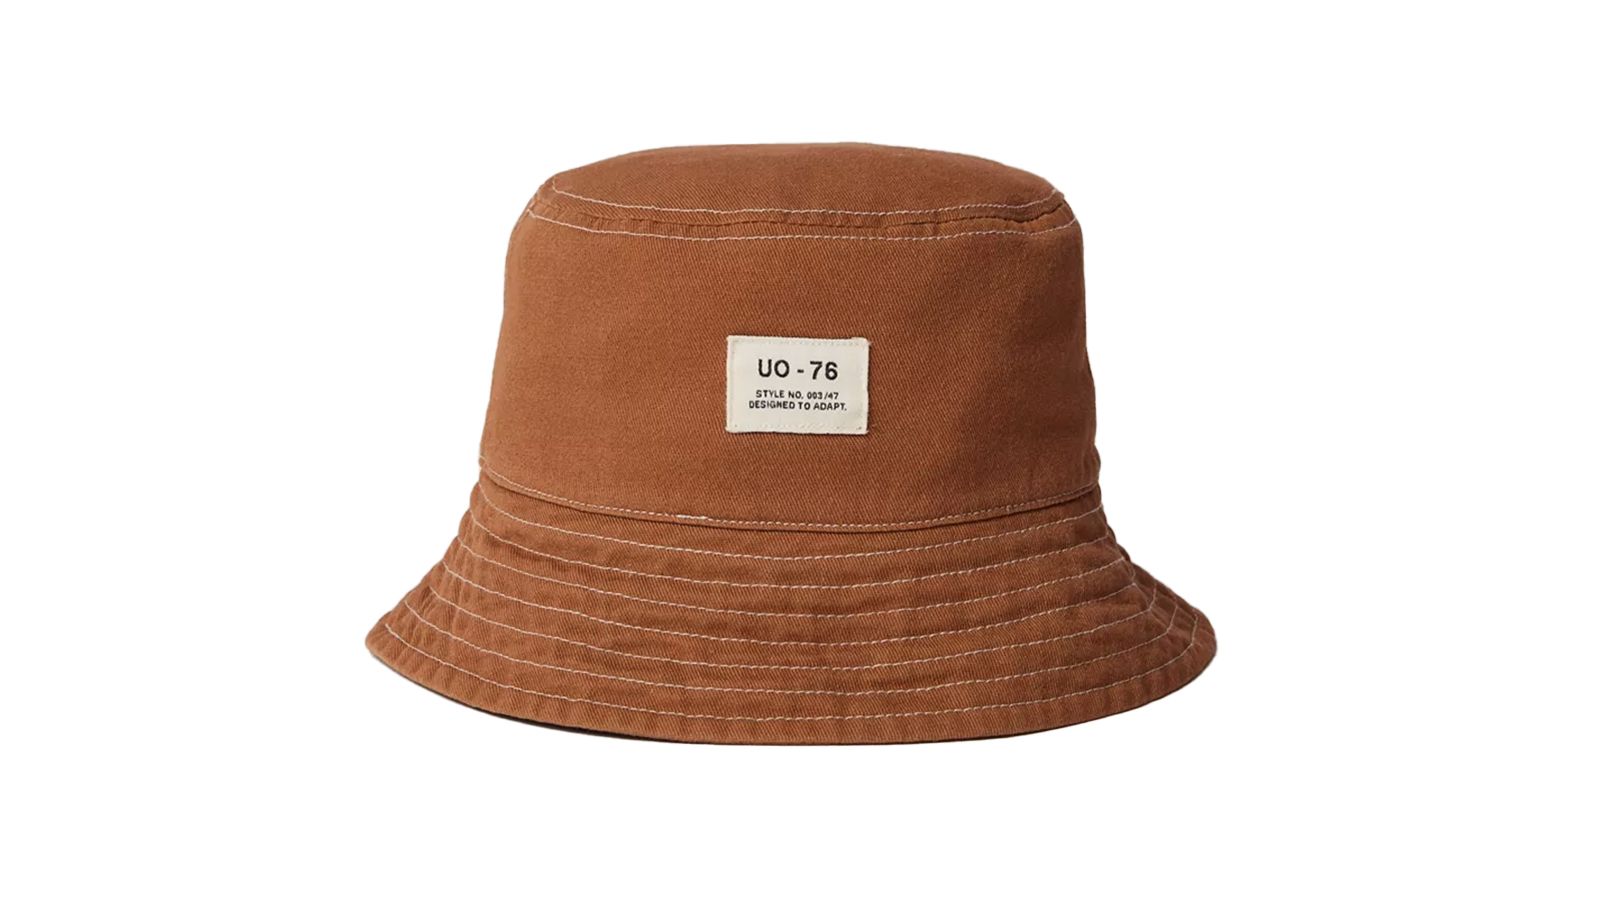 Embroidered Classic Brown Bucket Hat For Men And Women Adjustable And Multi  Style Hip Hop Style For Summer From Trend_setter, $17.82